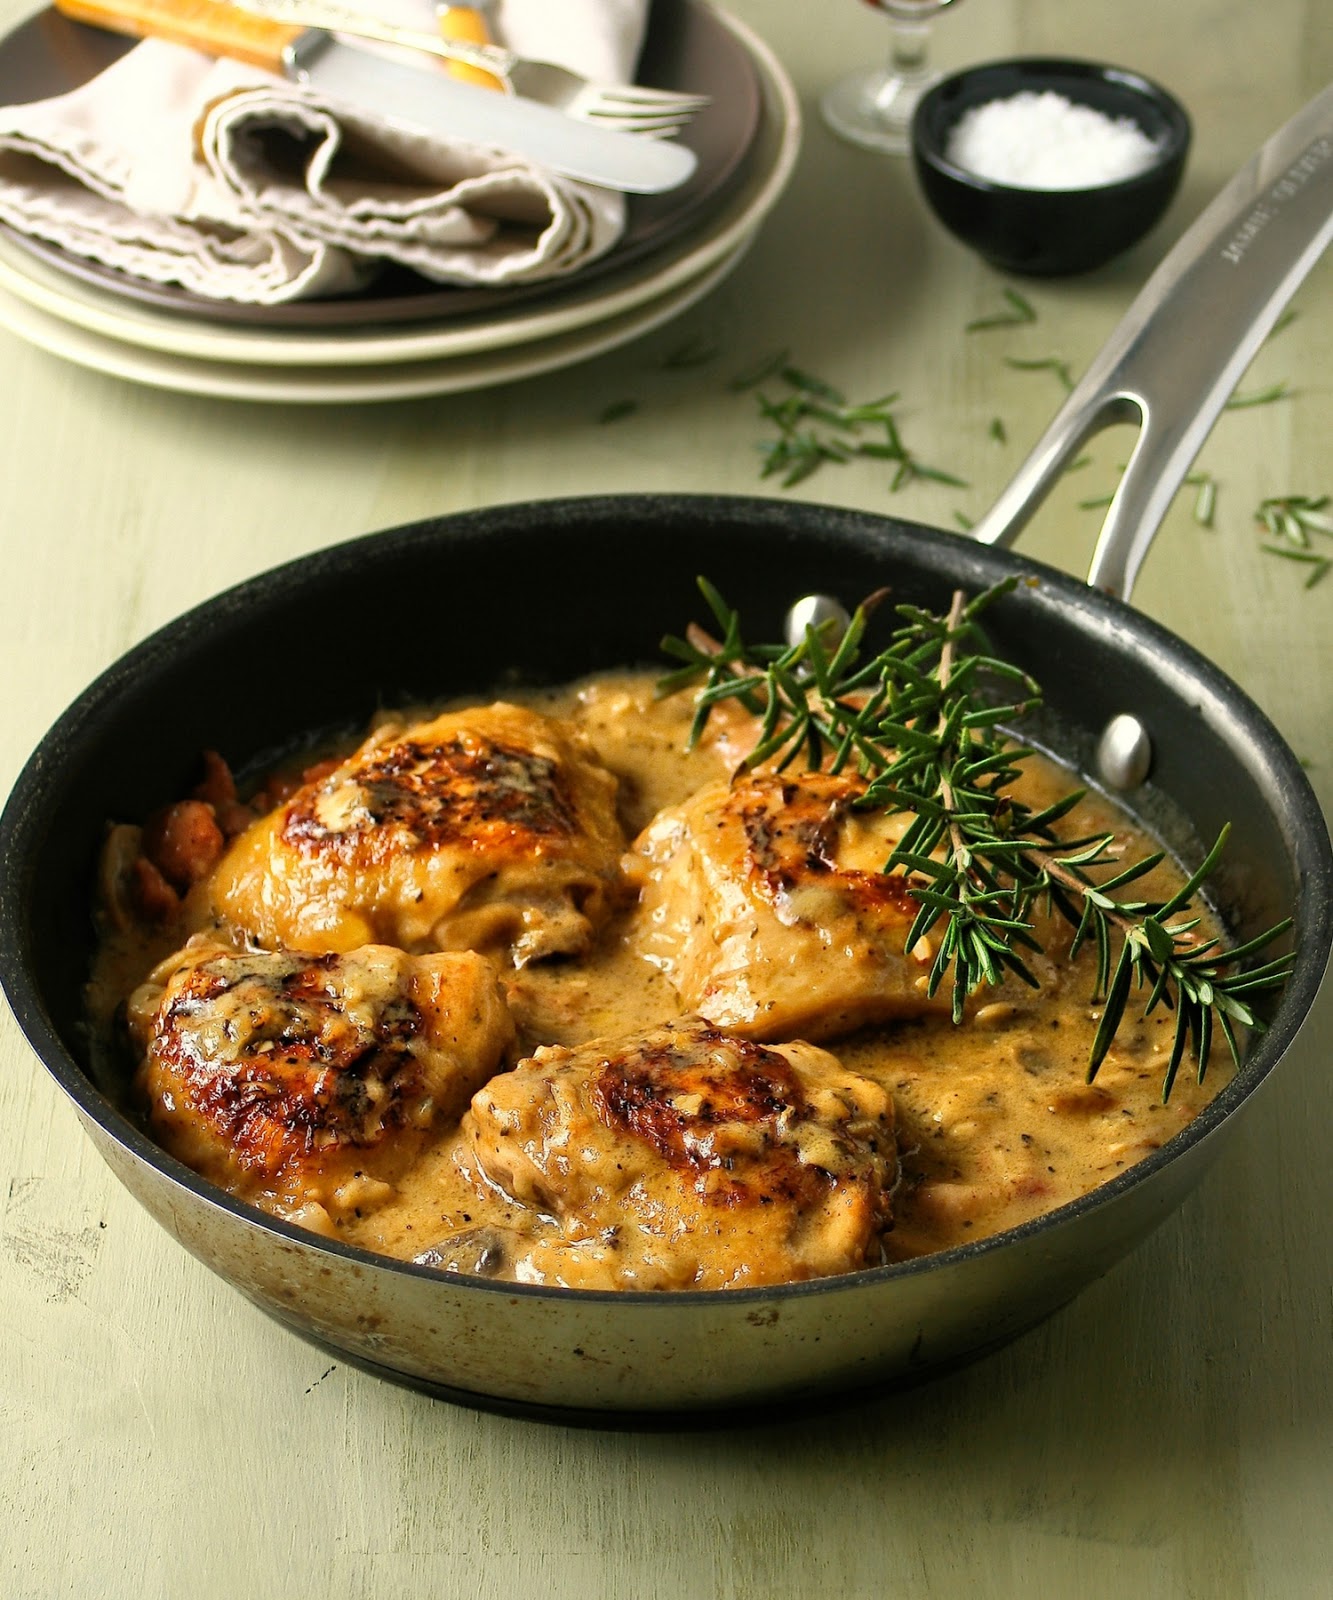 Cupcakes & Couscous: Creamy Chicken with Lemon and Rosemary